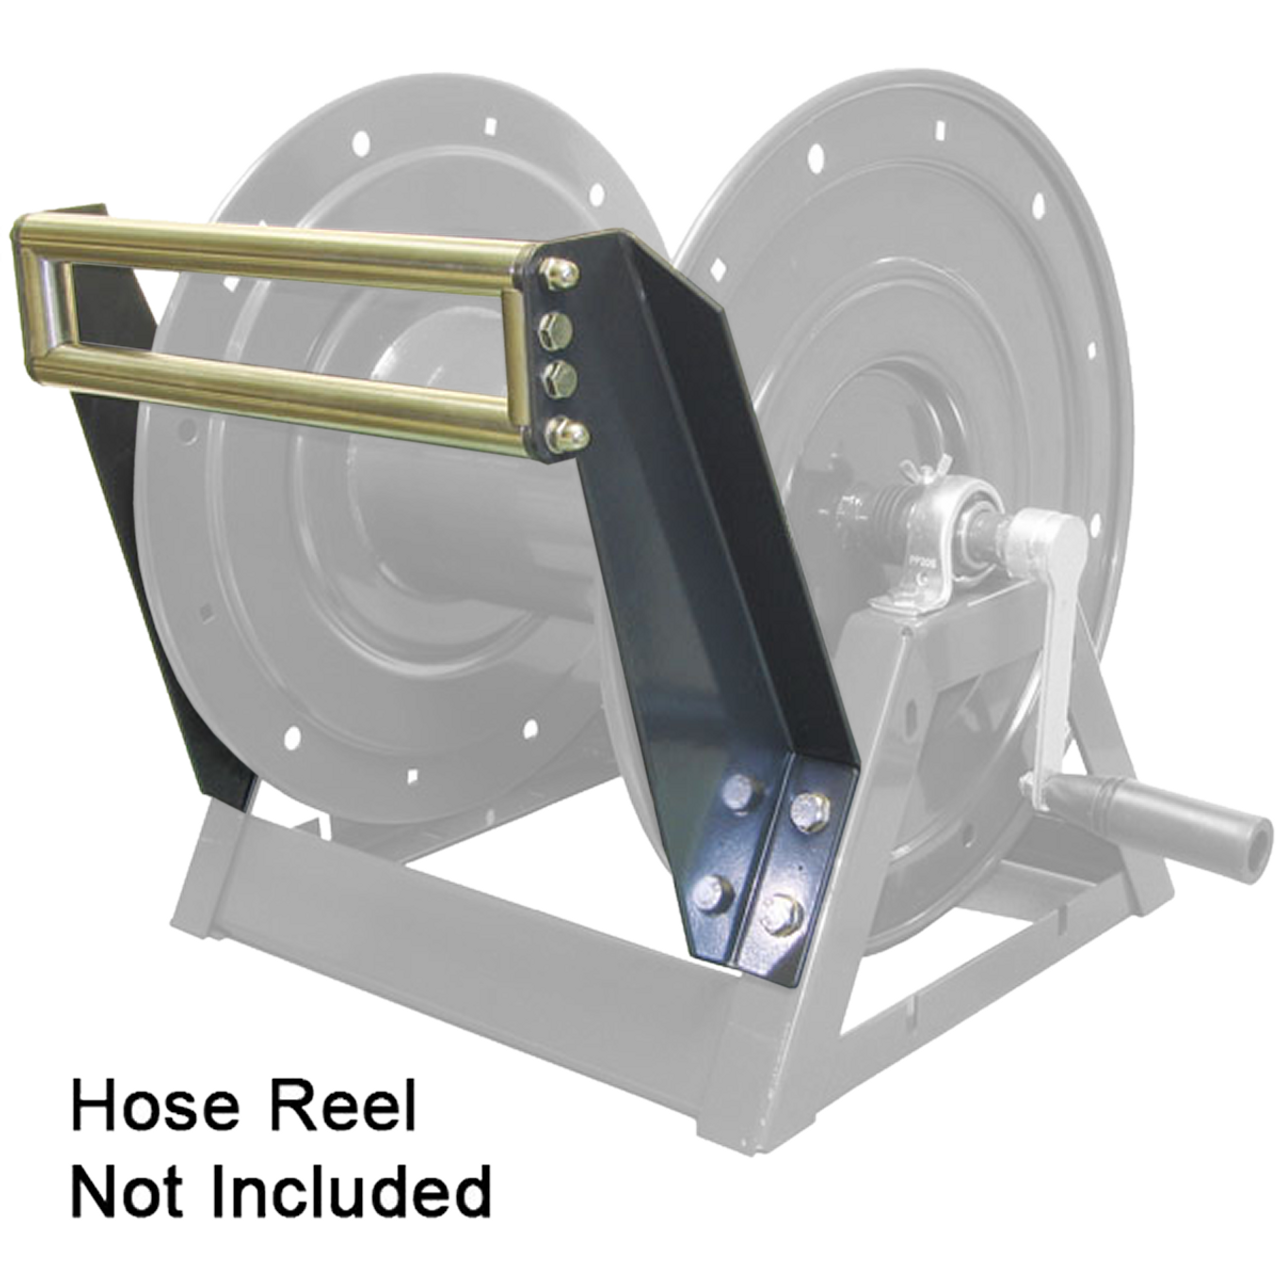 General Pump DHRA50300 3/8 x 300' Black Steel Hose Reel with Flat  Sidewalls, A-frame, Pin Lock and Brake and Stainless Steel Swivel Inlet,  5000 Psi: : Tools & Home Improvement